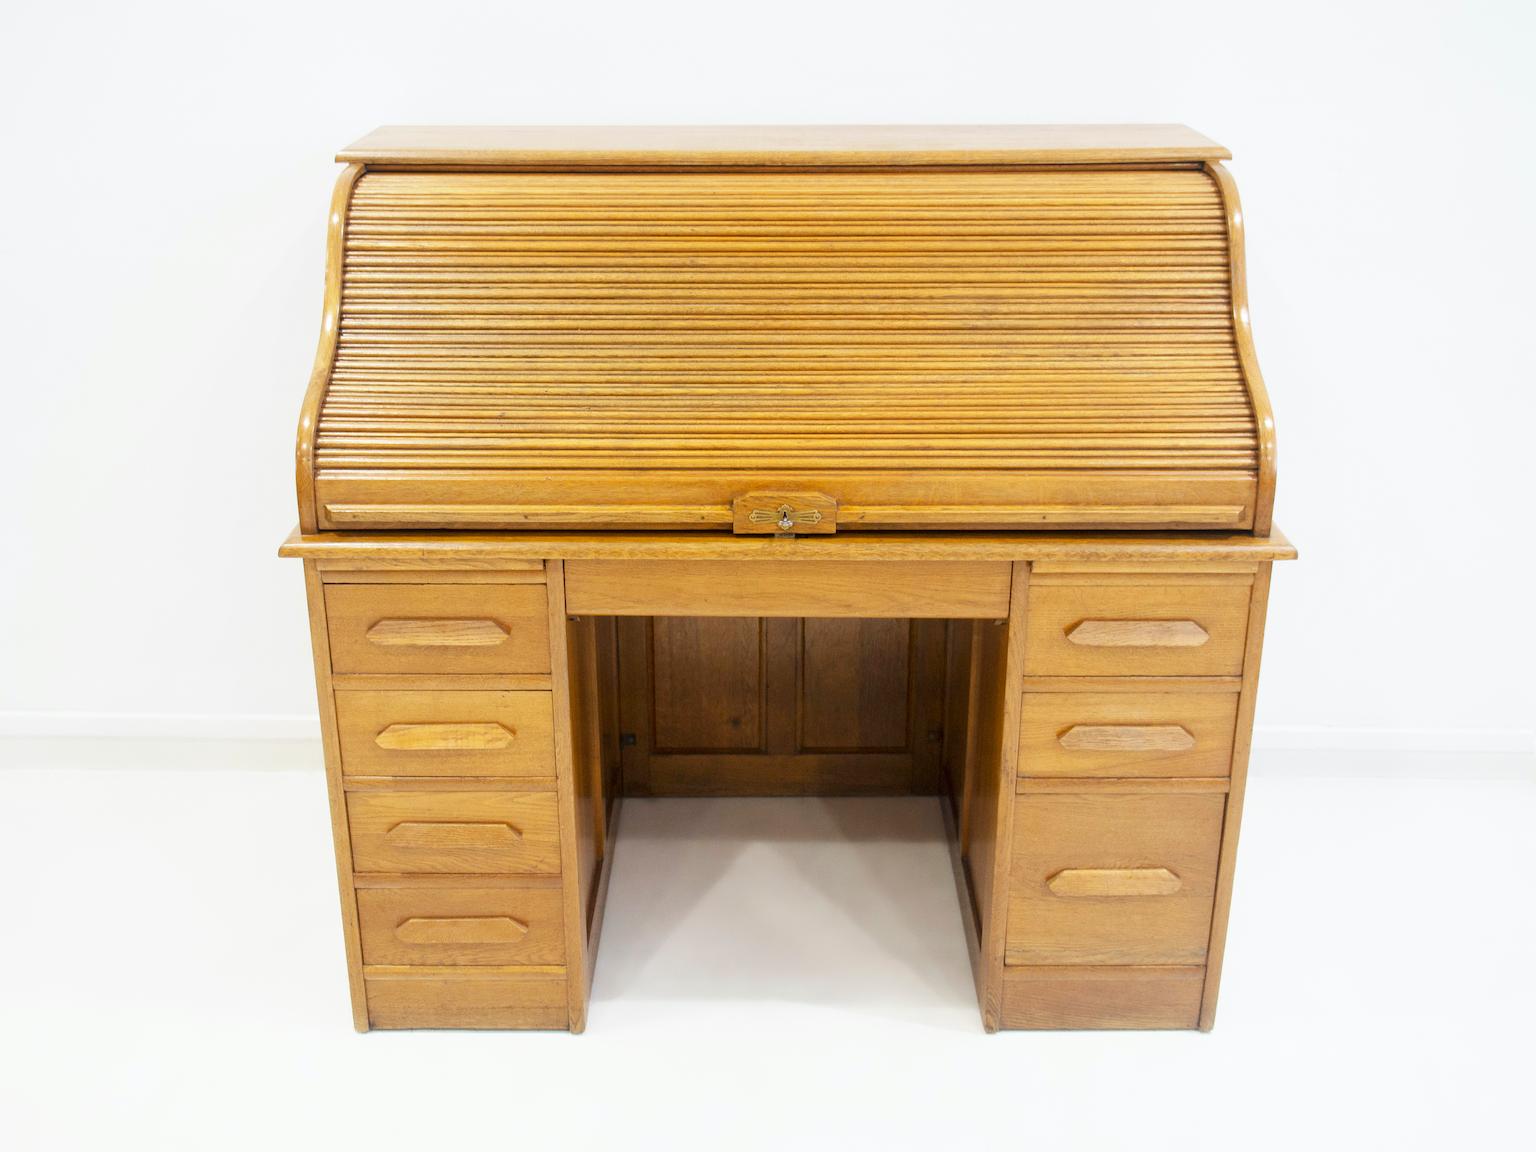 Oak secretaire / writing desk from circa 1900's. Featuring a roll-up flap with underlying writing board, shelf interior and two drawers. Below the writing desk there are two pull-out boards and seven drawers. Key available.